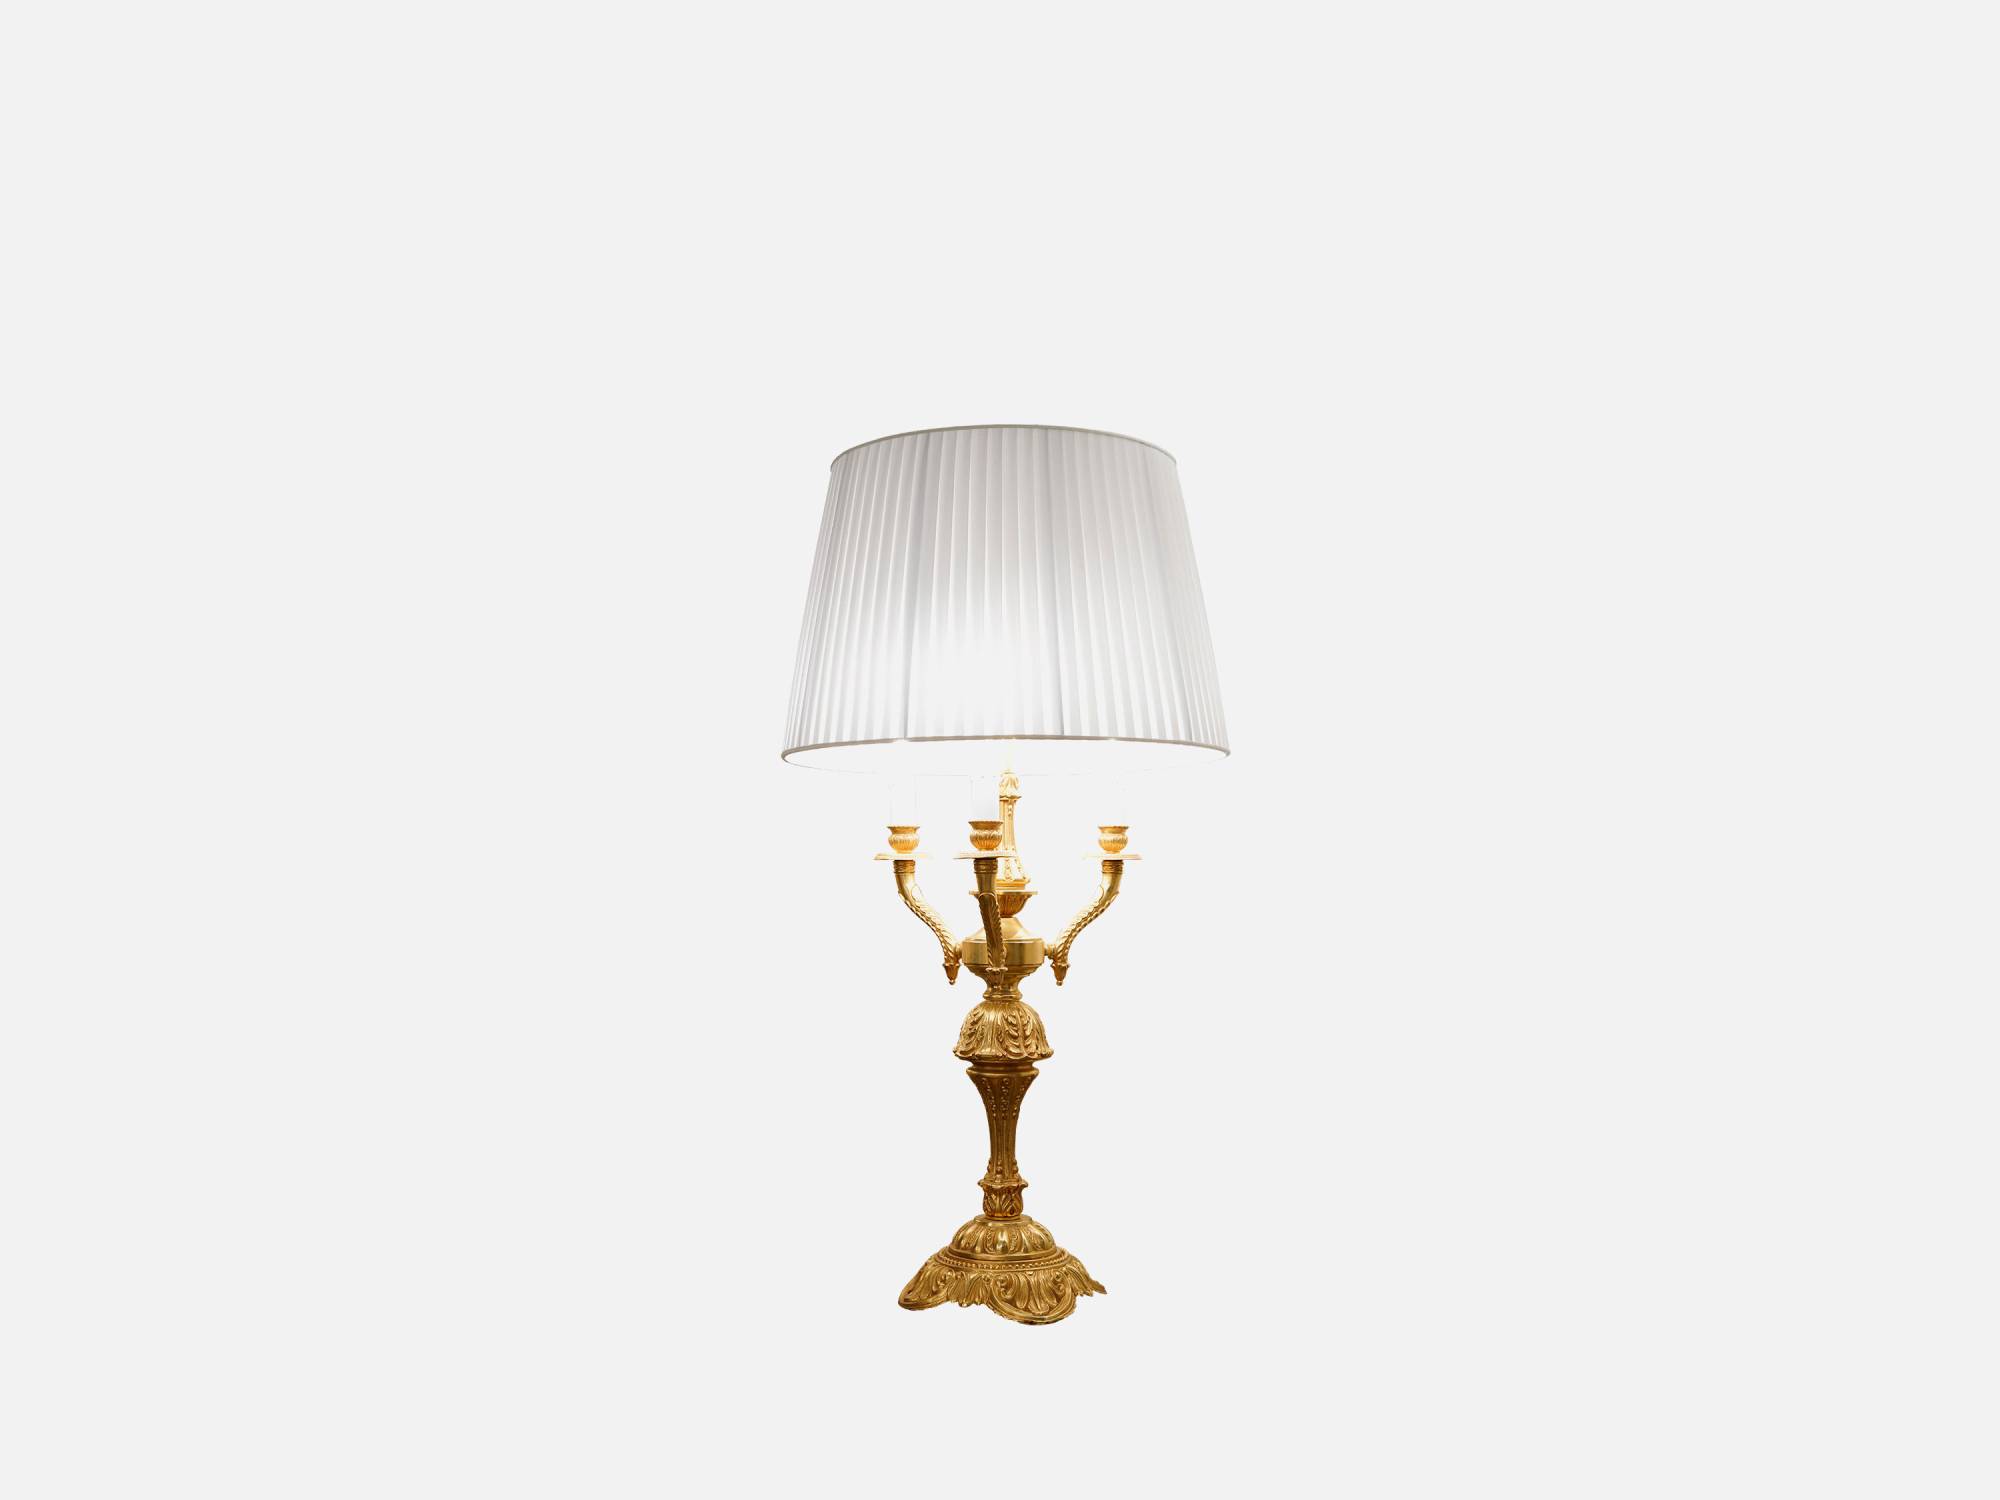 ART. 2179 – The elegance of luxury classic Lighting made in Italy by C.G. Capelletti.